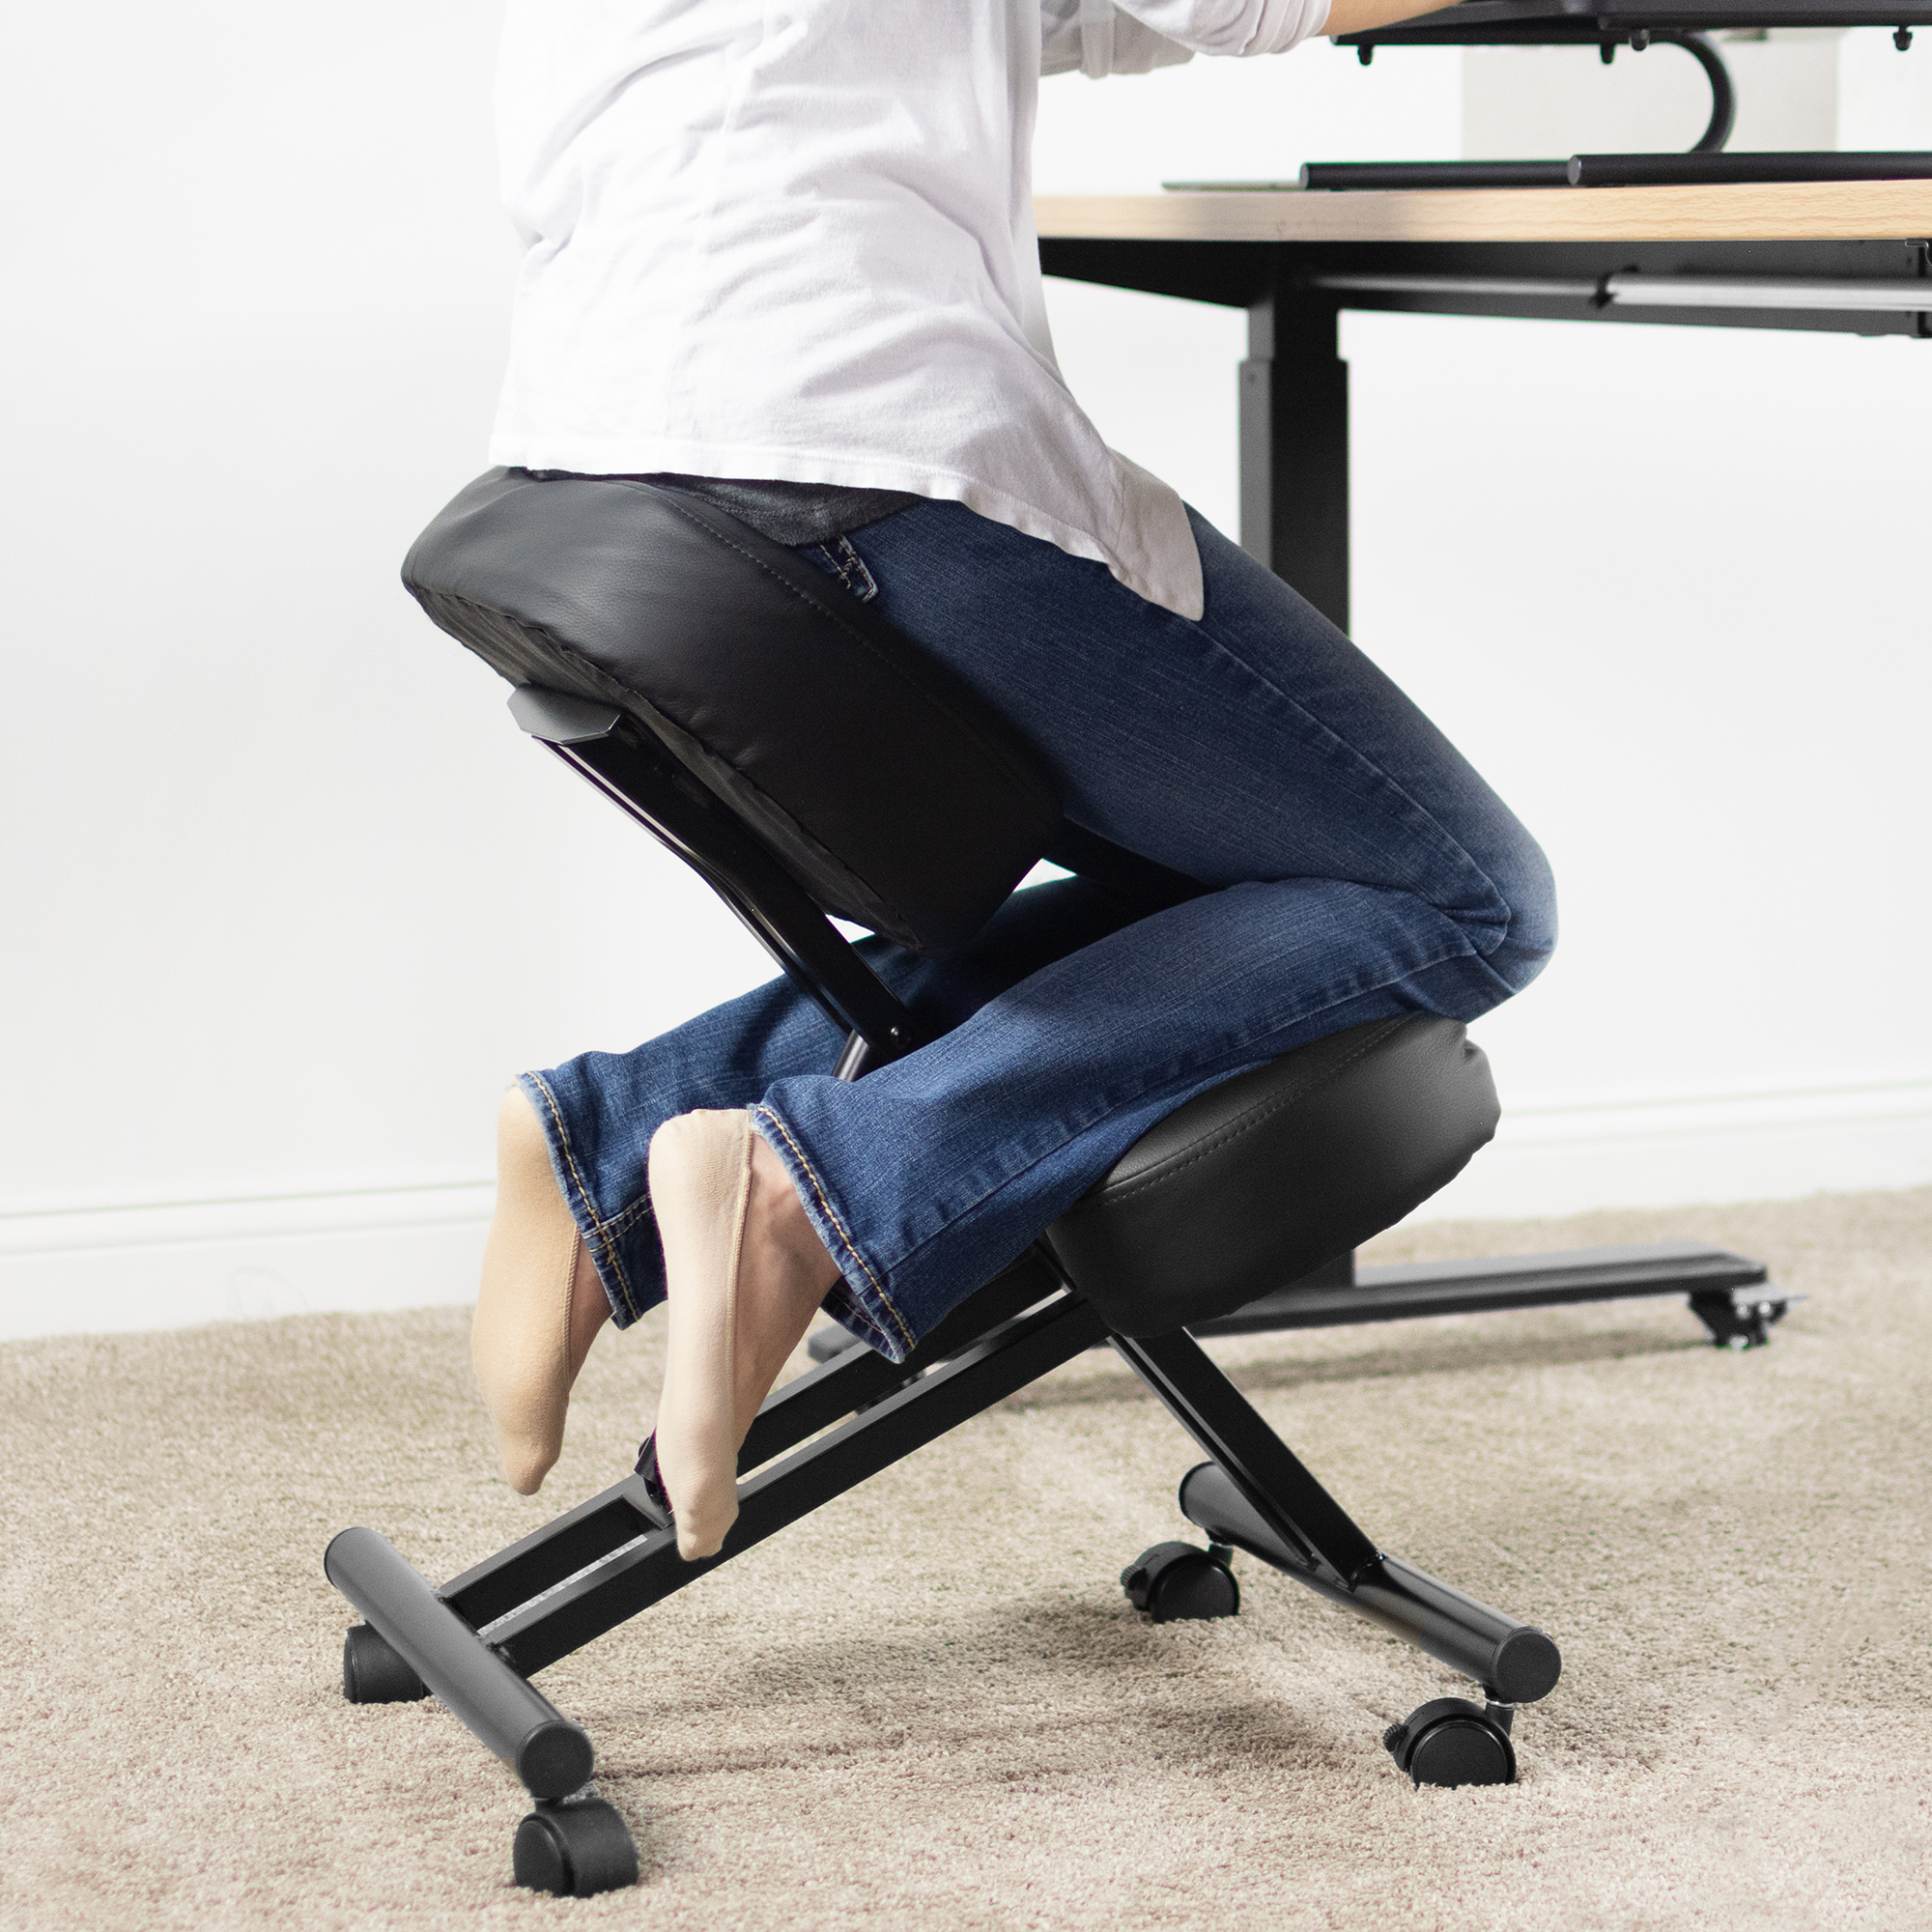 Used DRAGONN (By VIVO) Ergonomic Kneeling Chair for Home and Office